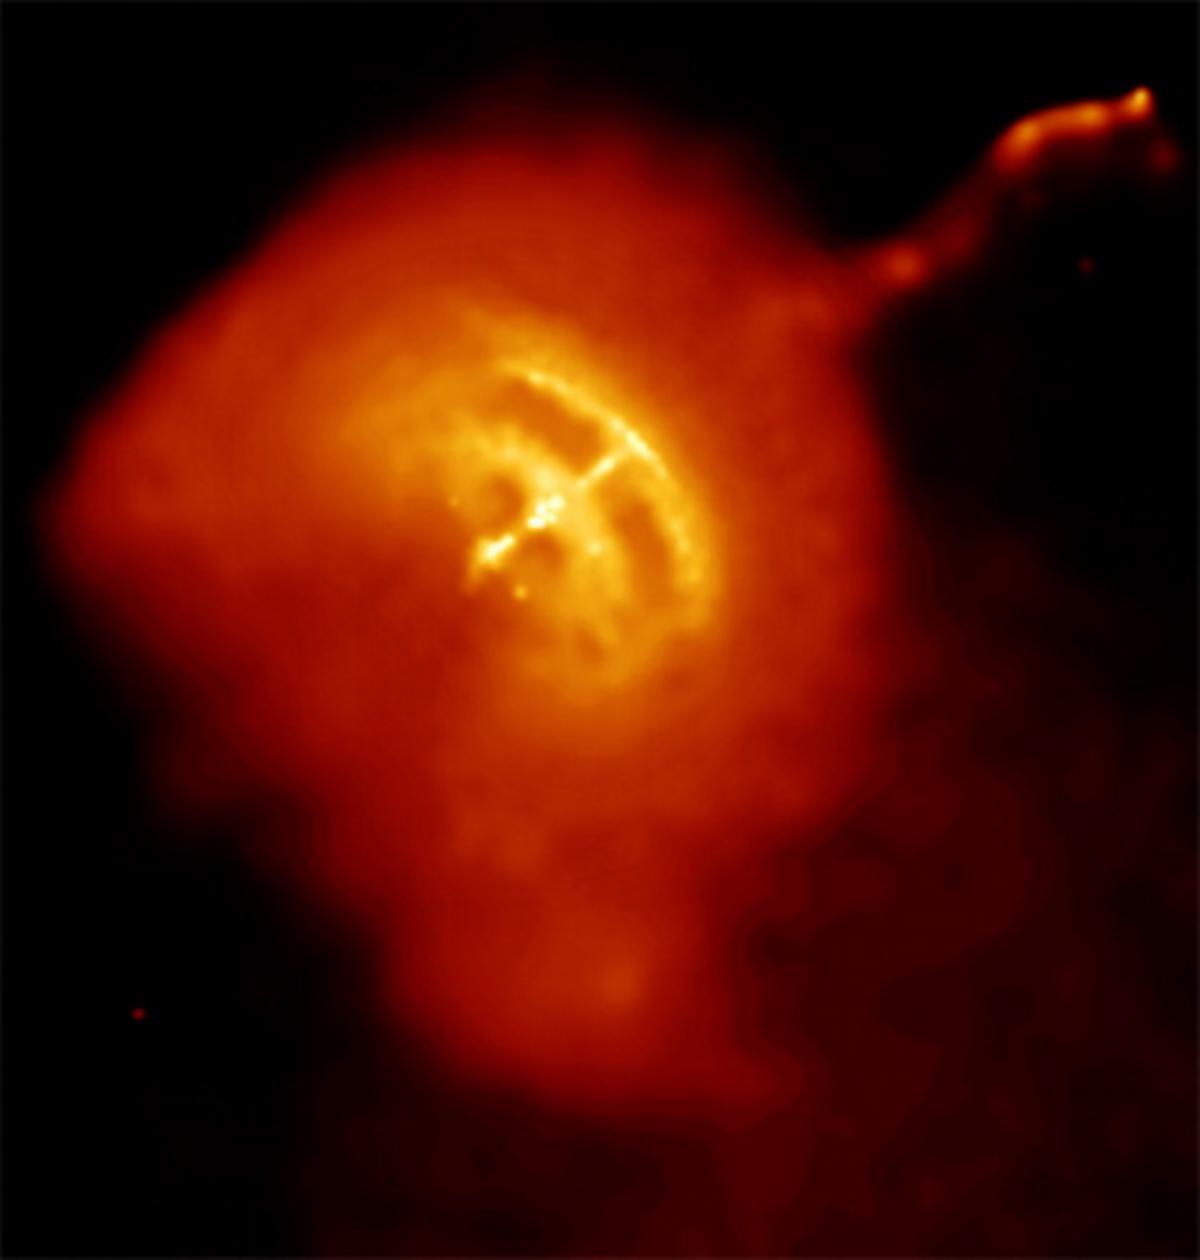 An image of the Vela Pulsar captured by the Chandra X-ray Observatory on July 6, 2003.